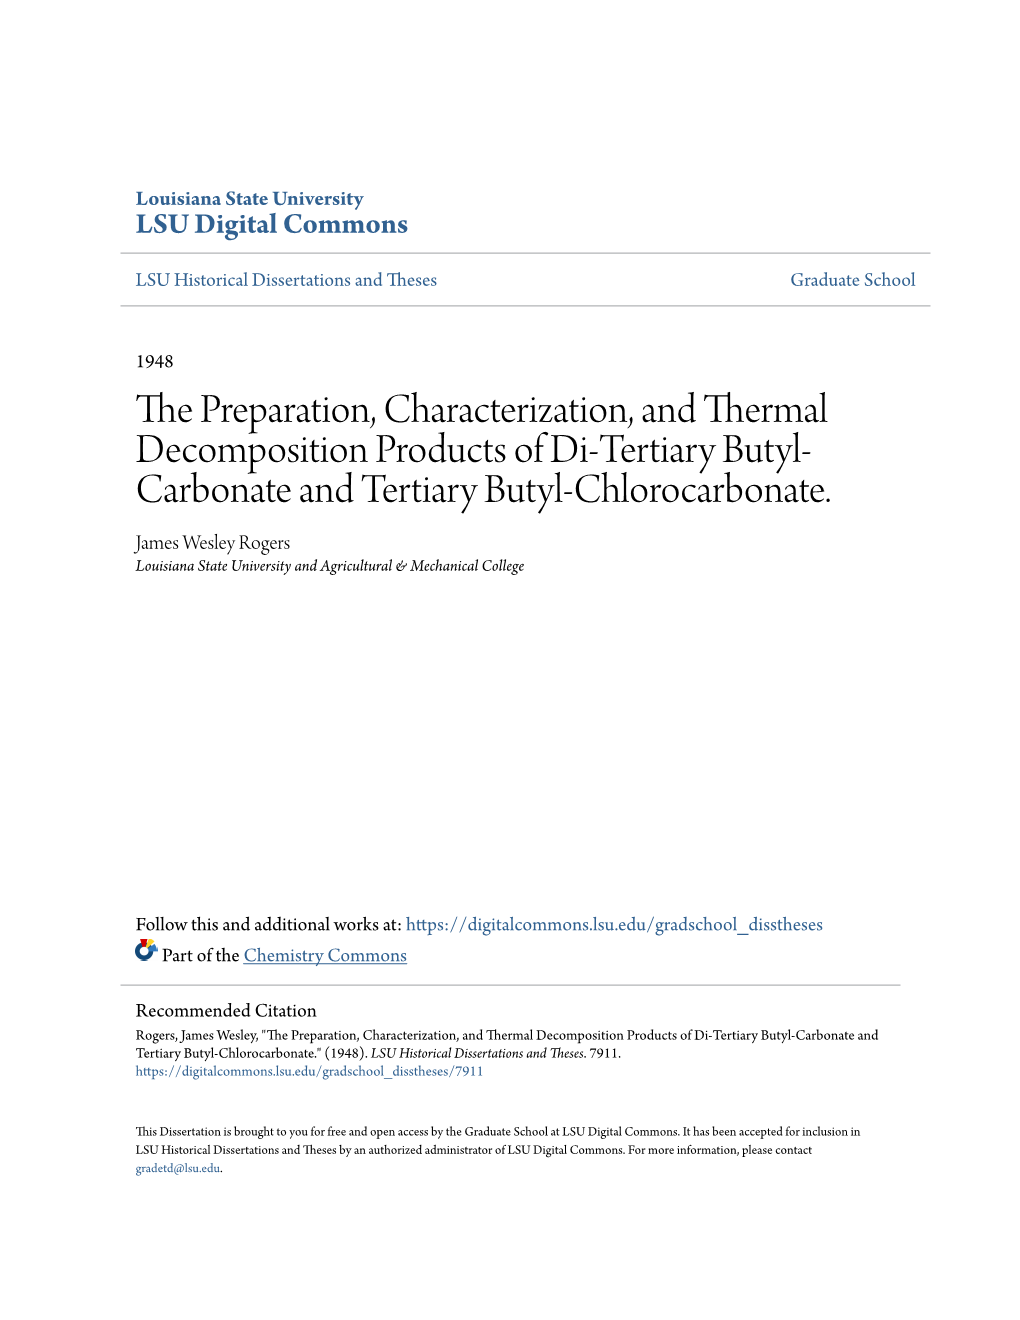 The Preparation, Characterization, and Thermal Decomposition Products Op Di-Tkrtiaky Butyl Carbonate and Tertiary Butyl Chlorocahbonate